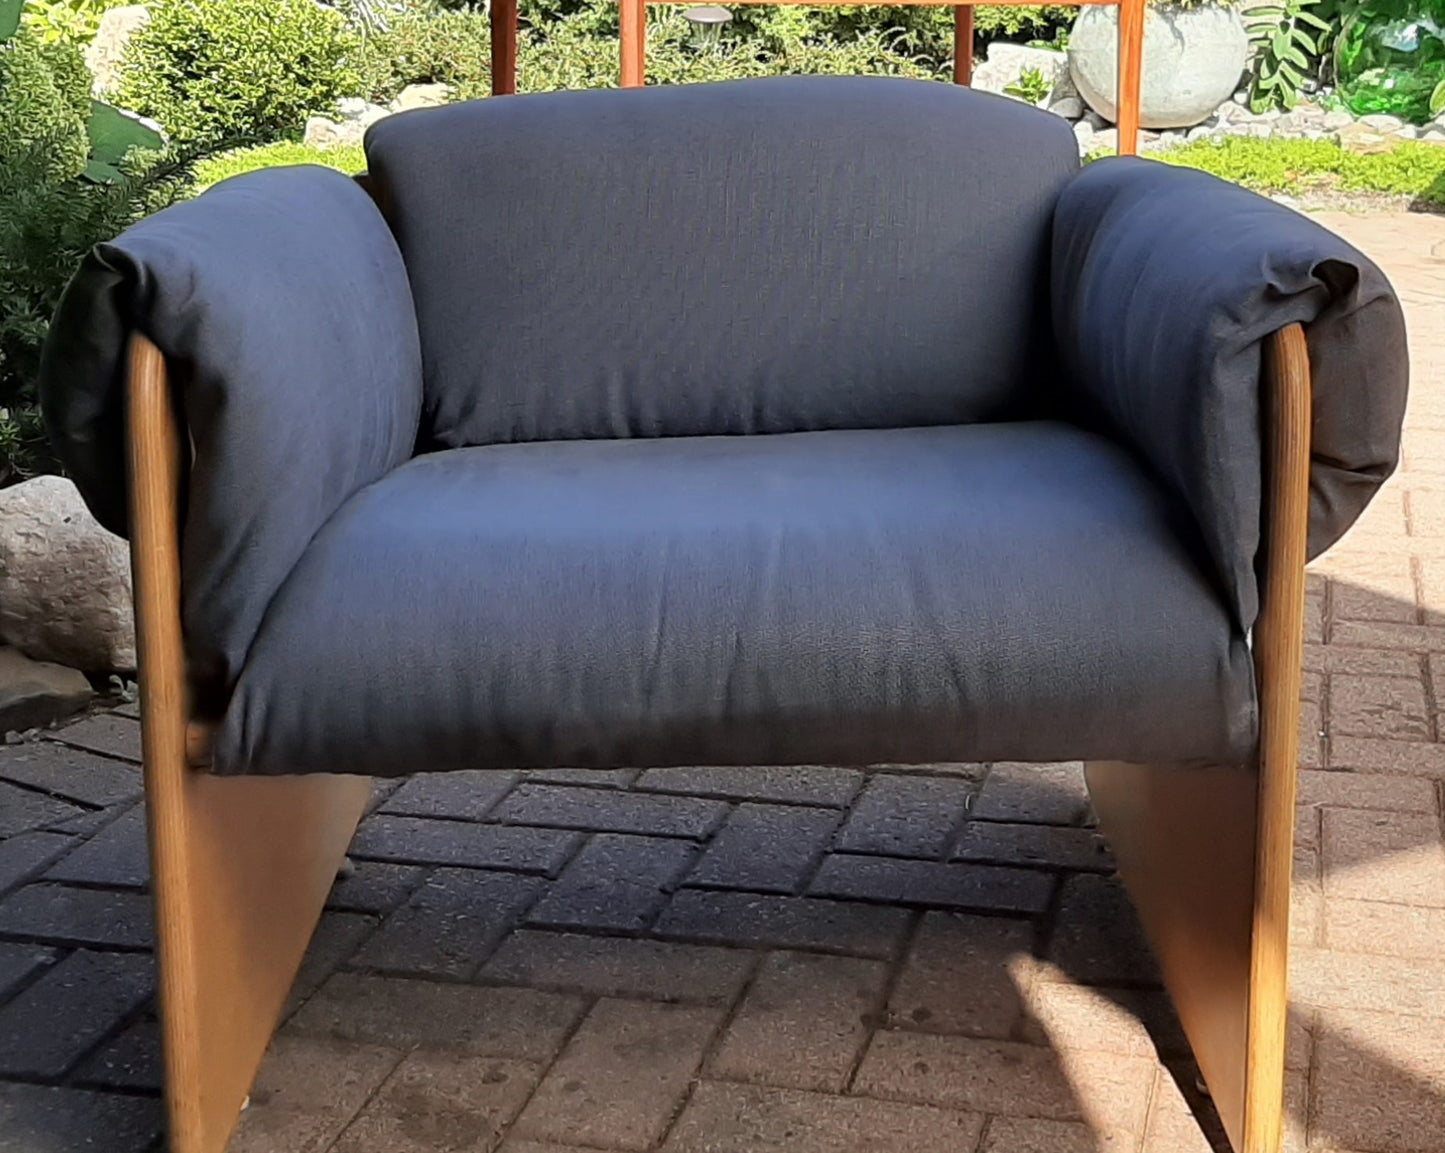 Restored Mid Century Modern Lounge Armchair in grey linen by Muller and Stewart